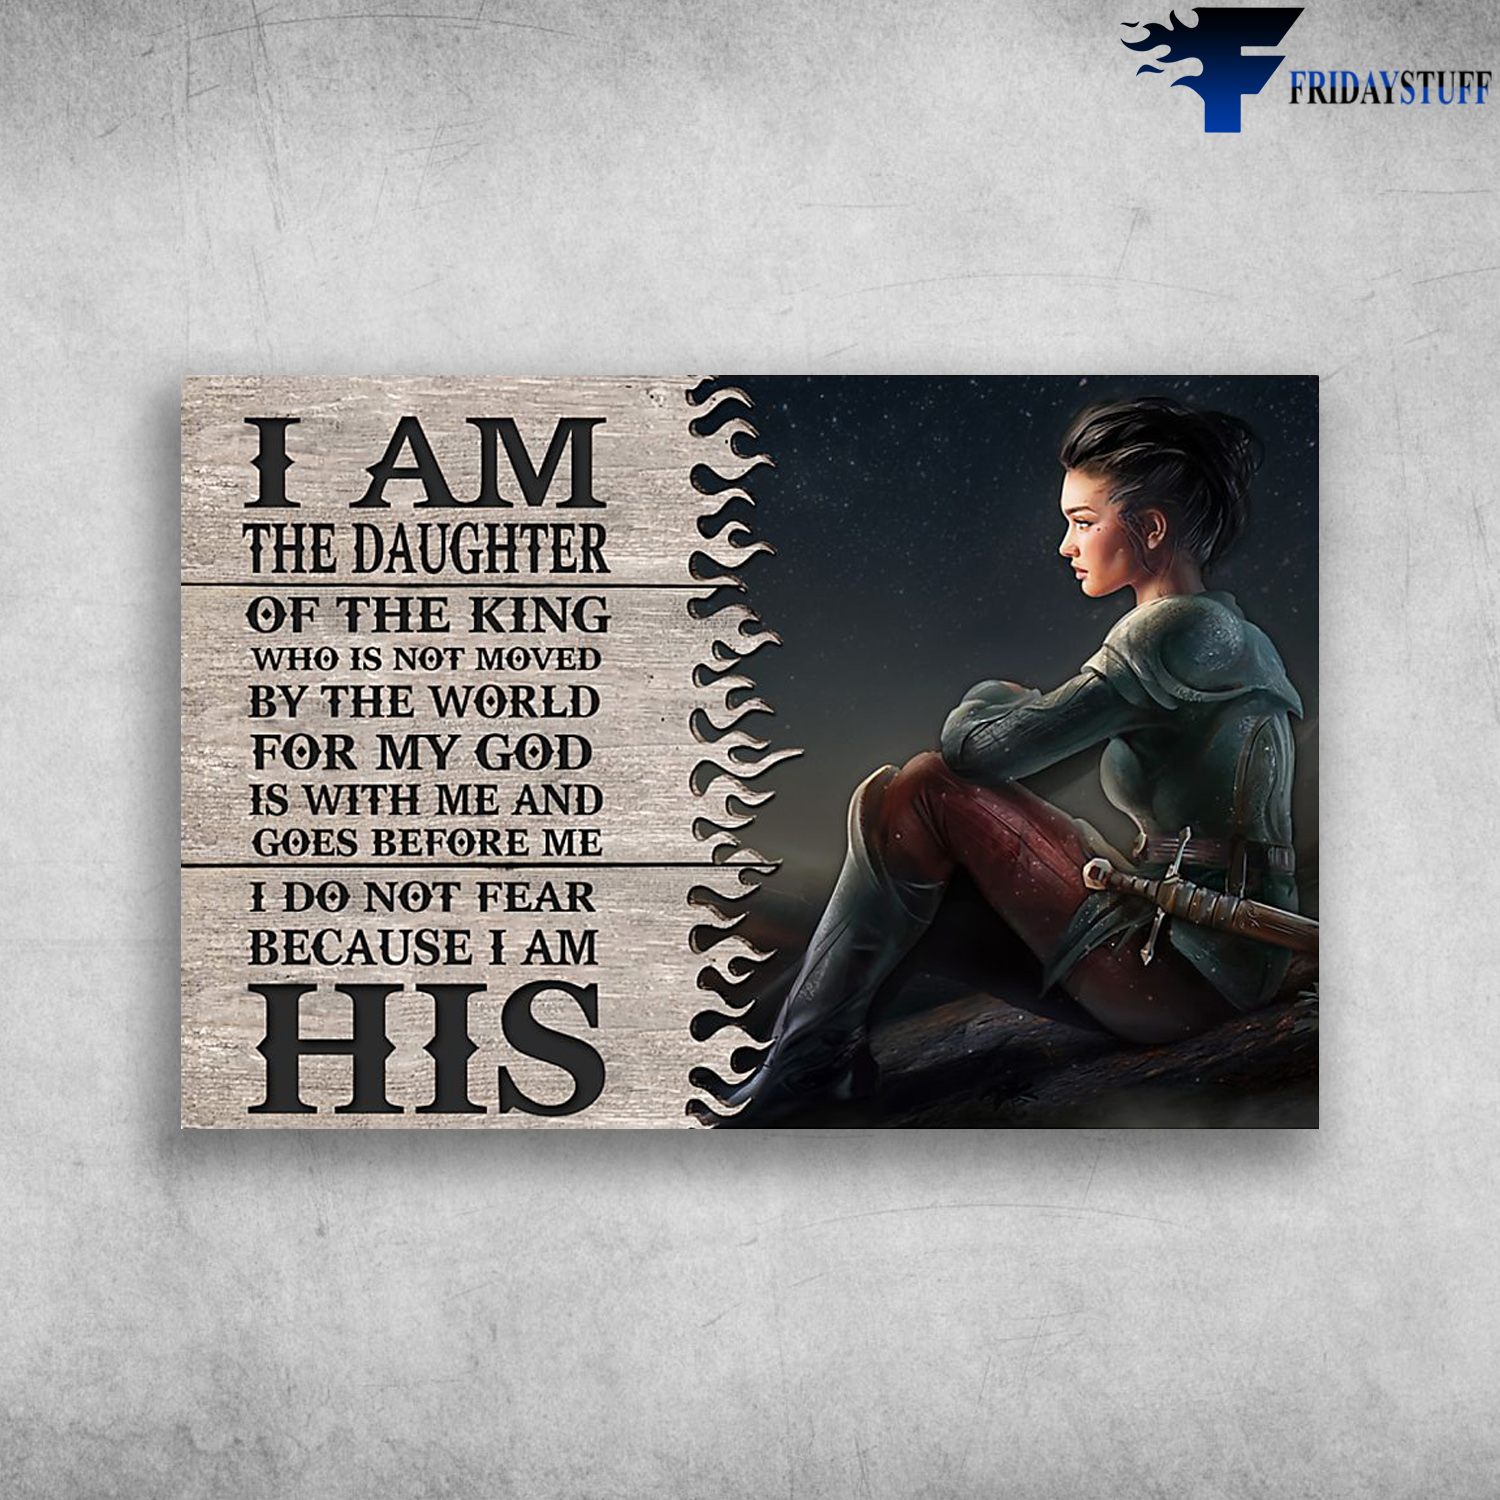 Daughter Of The King - I Am The Daughter Of The King, Who Is Not Moved By The World For My God With Me And Goes Before Me, I Do Not Fear, Because I Am His